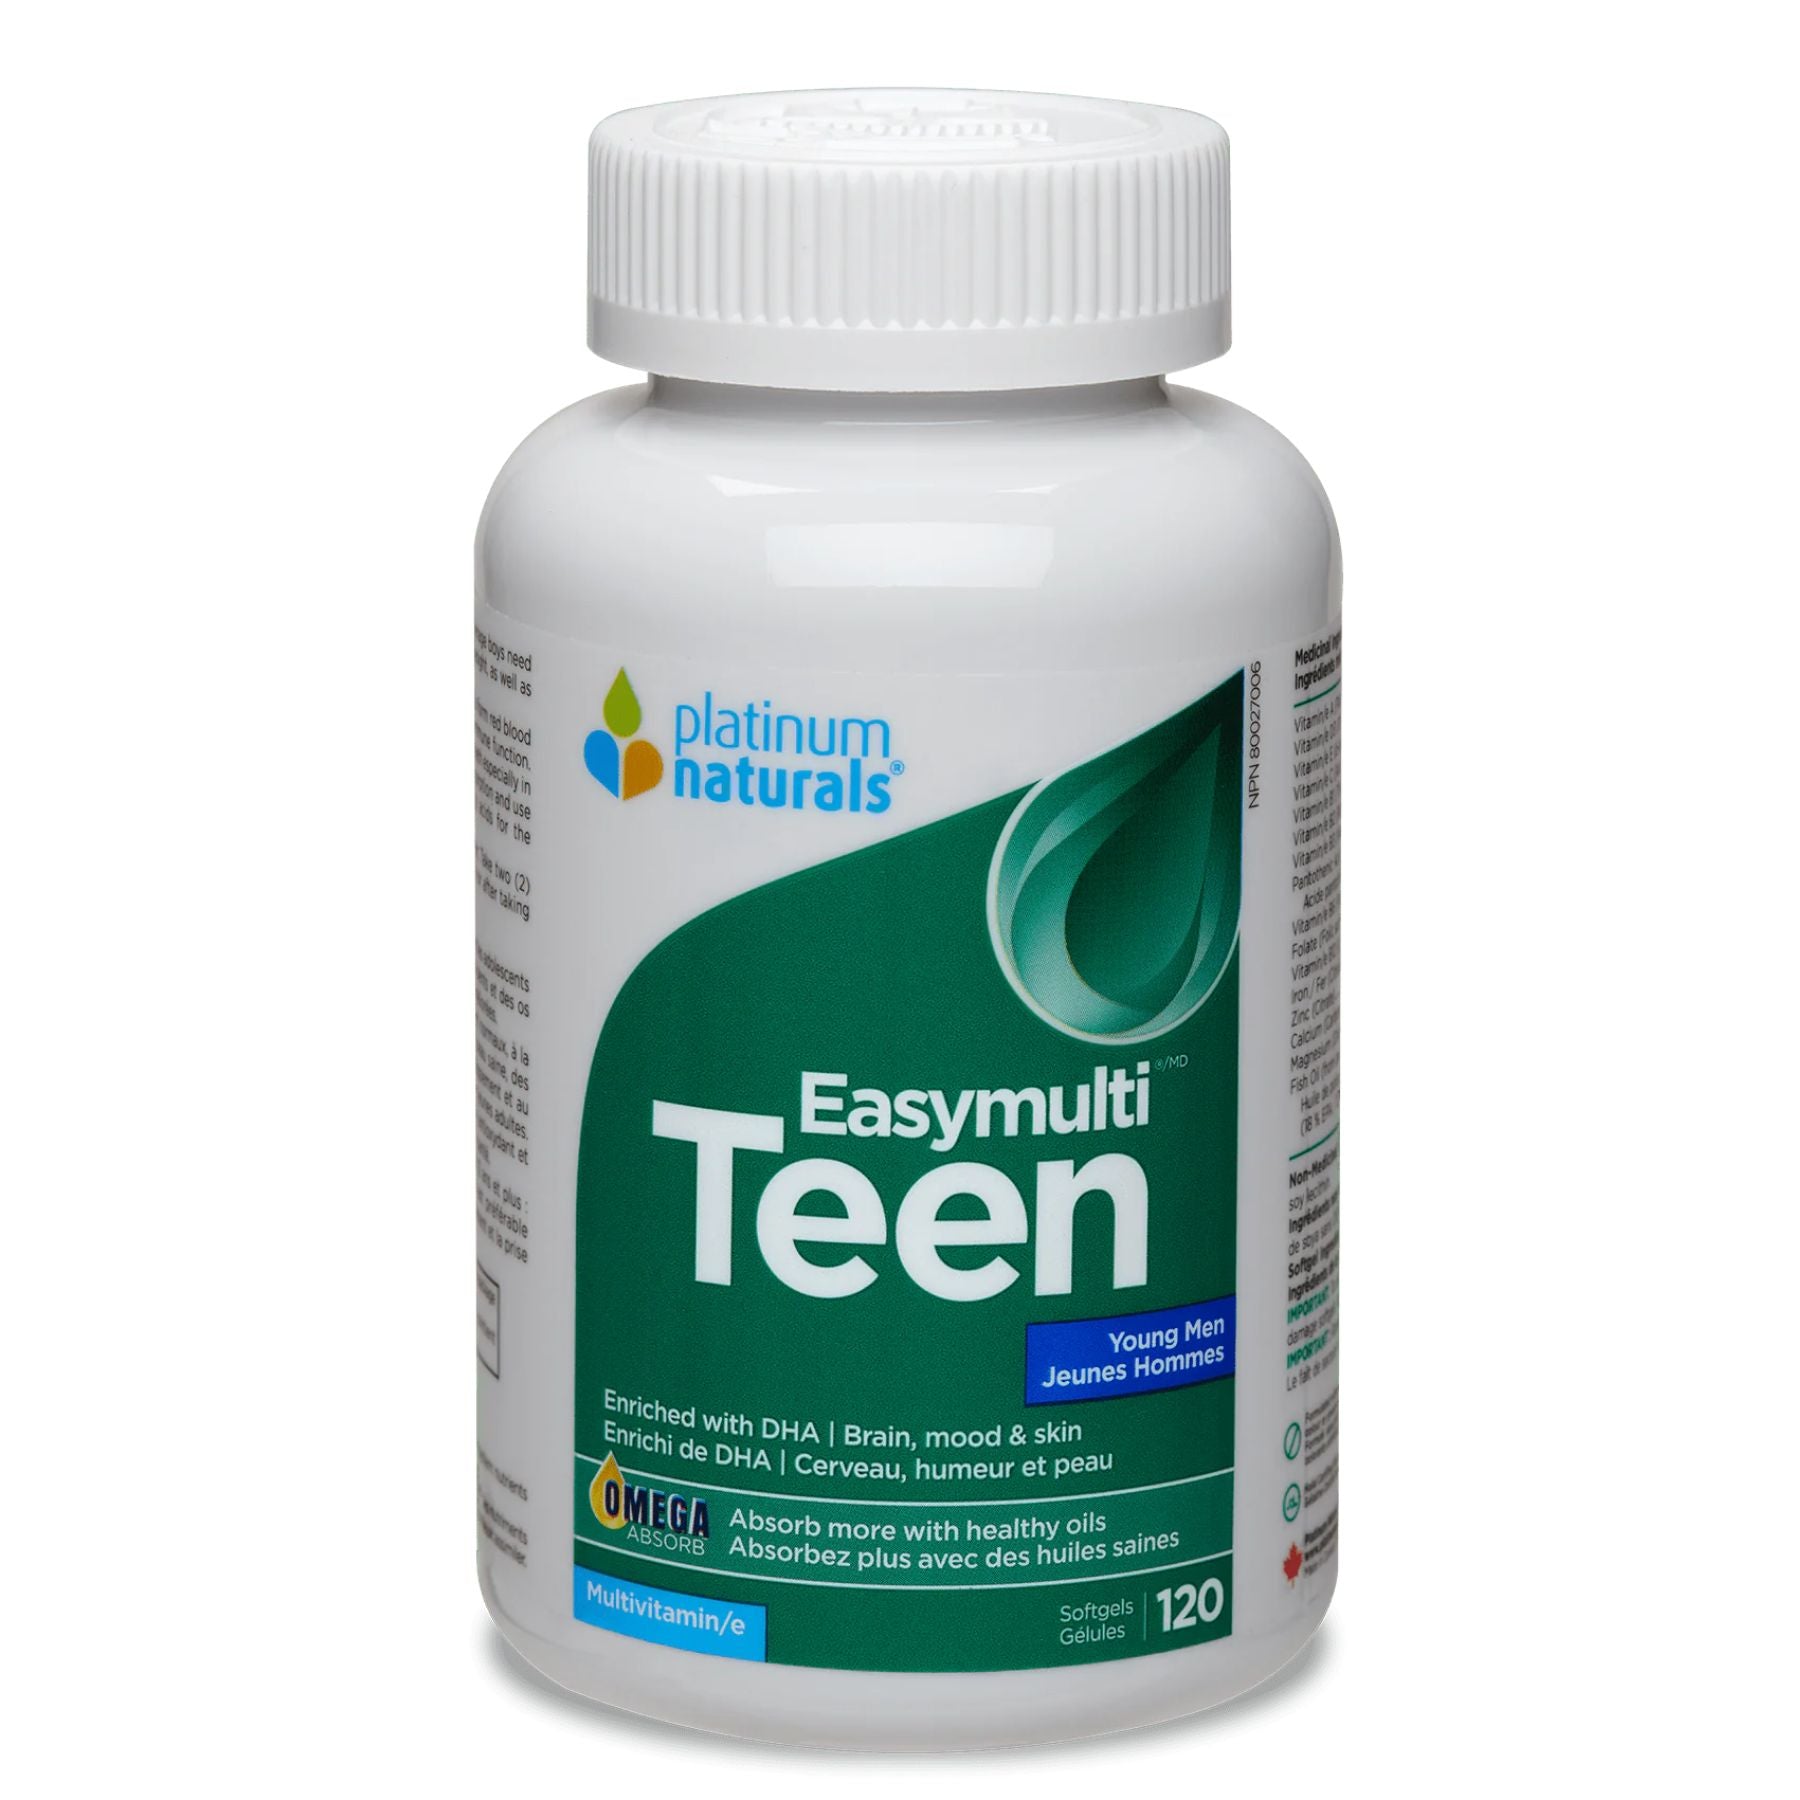 Platinum Naturals Easymulti Teen for Young Men 120s